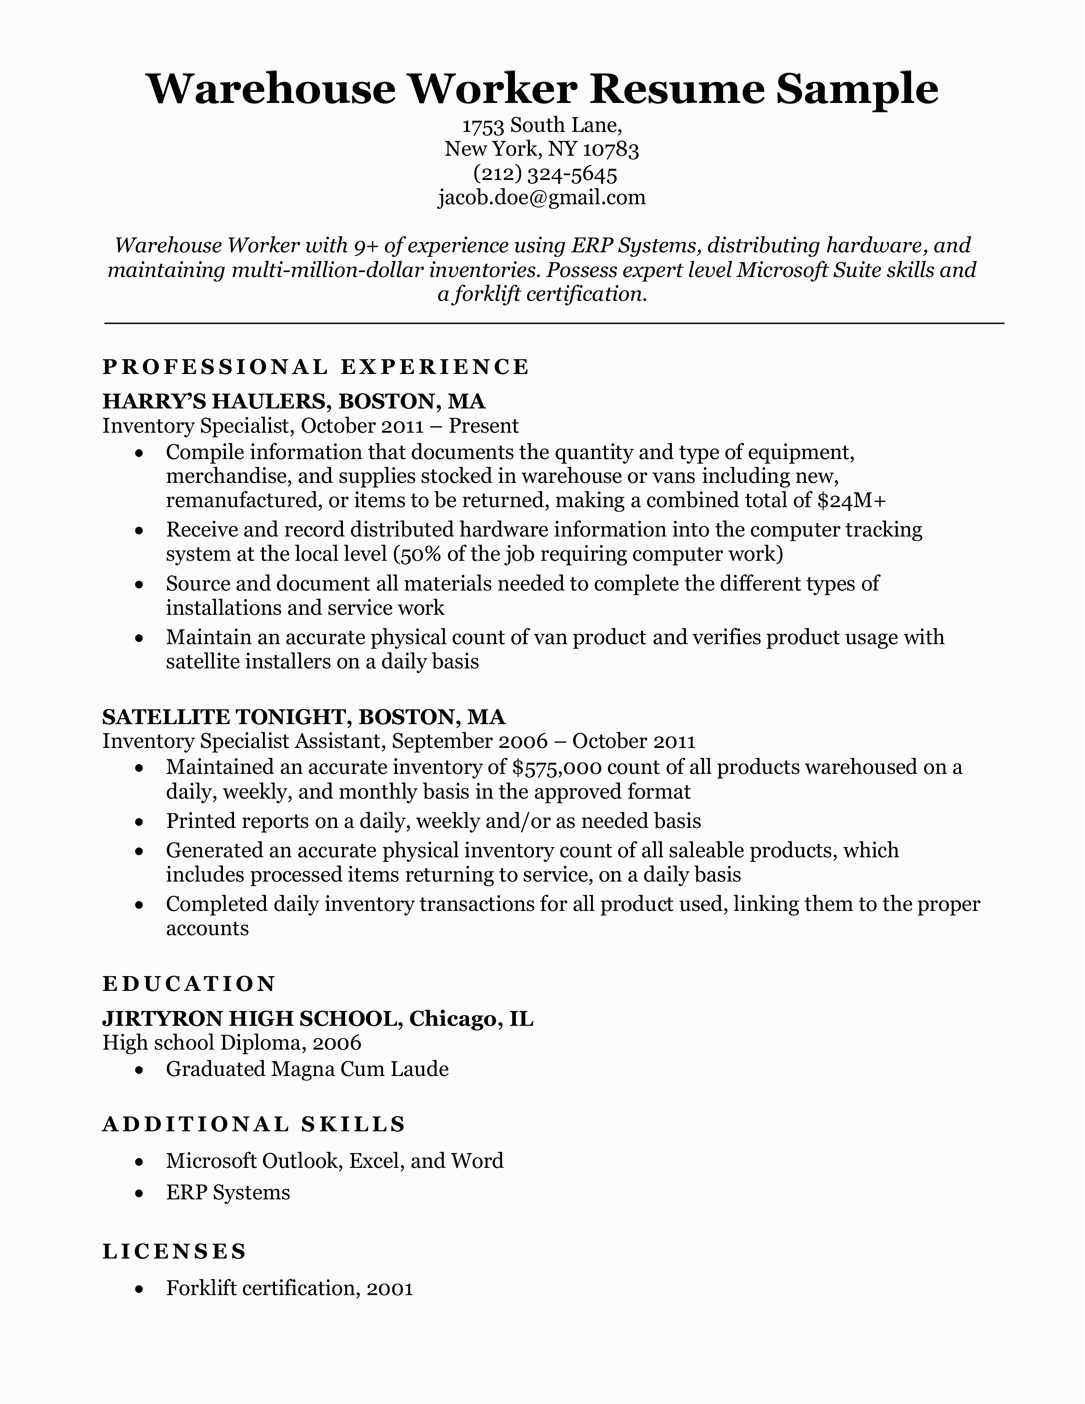 Sample Resume Objective for Warehouse Worker Warehouse Worker Resume Sample